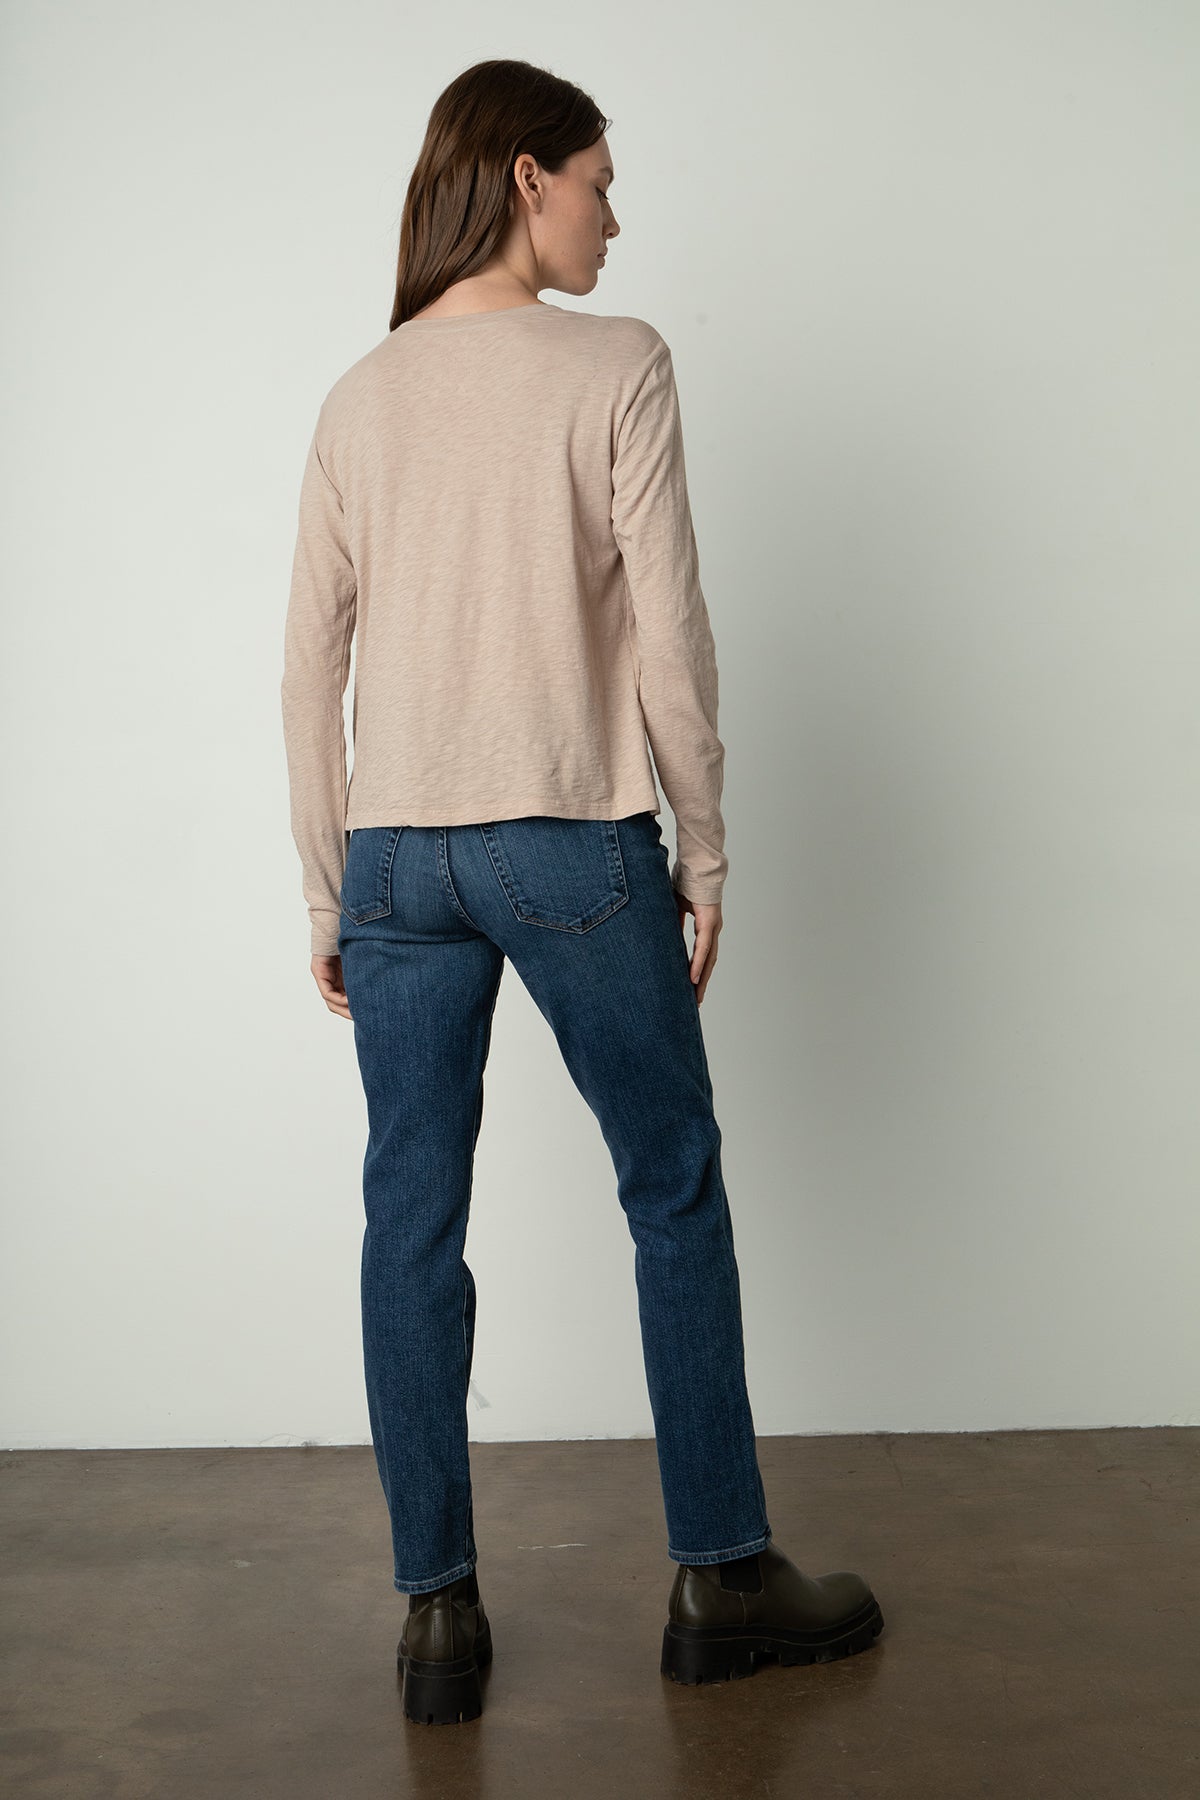 the back view of a woman wearing Velvet by Graham & Spencer jeans and a HESTER CREW NECK TEE.-24532973551809